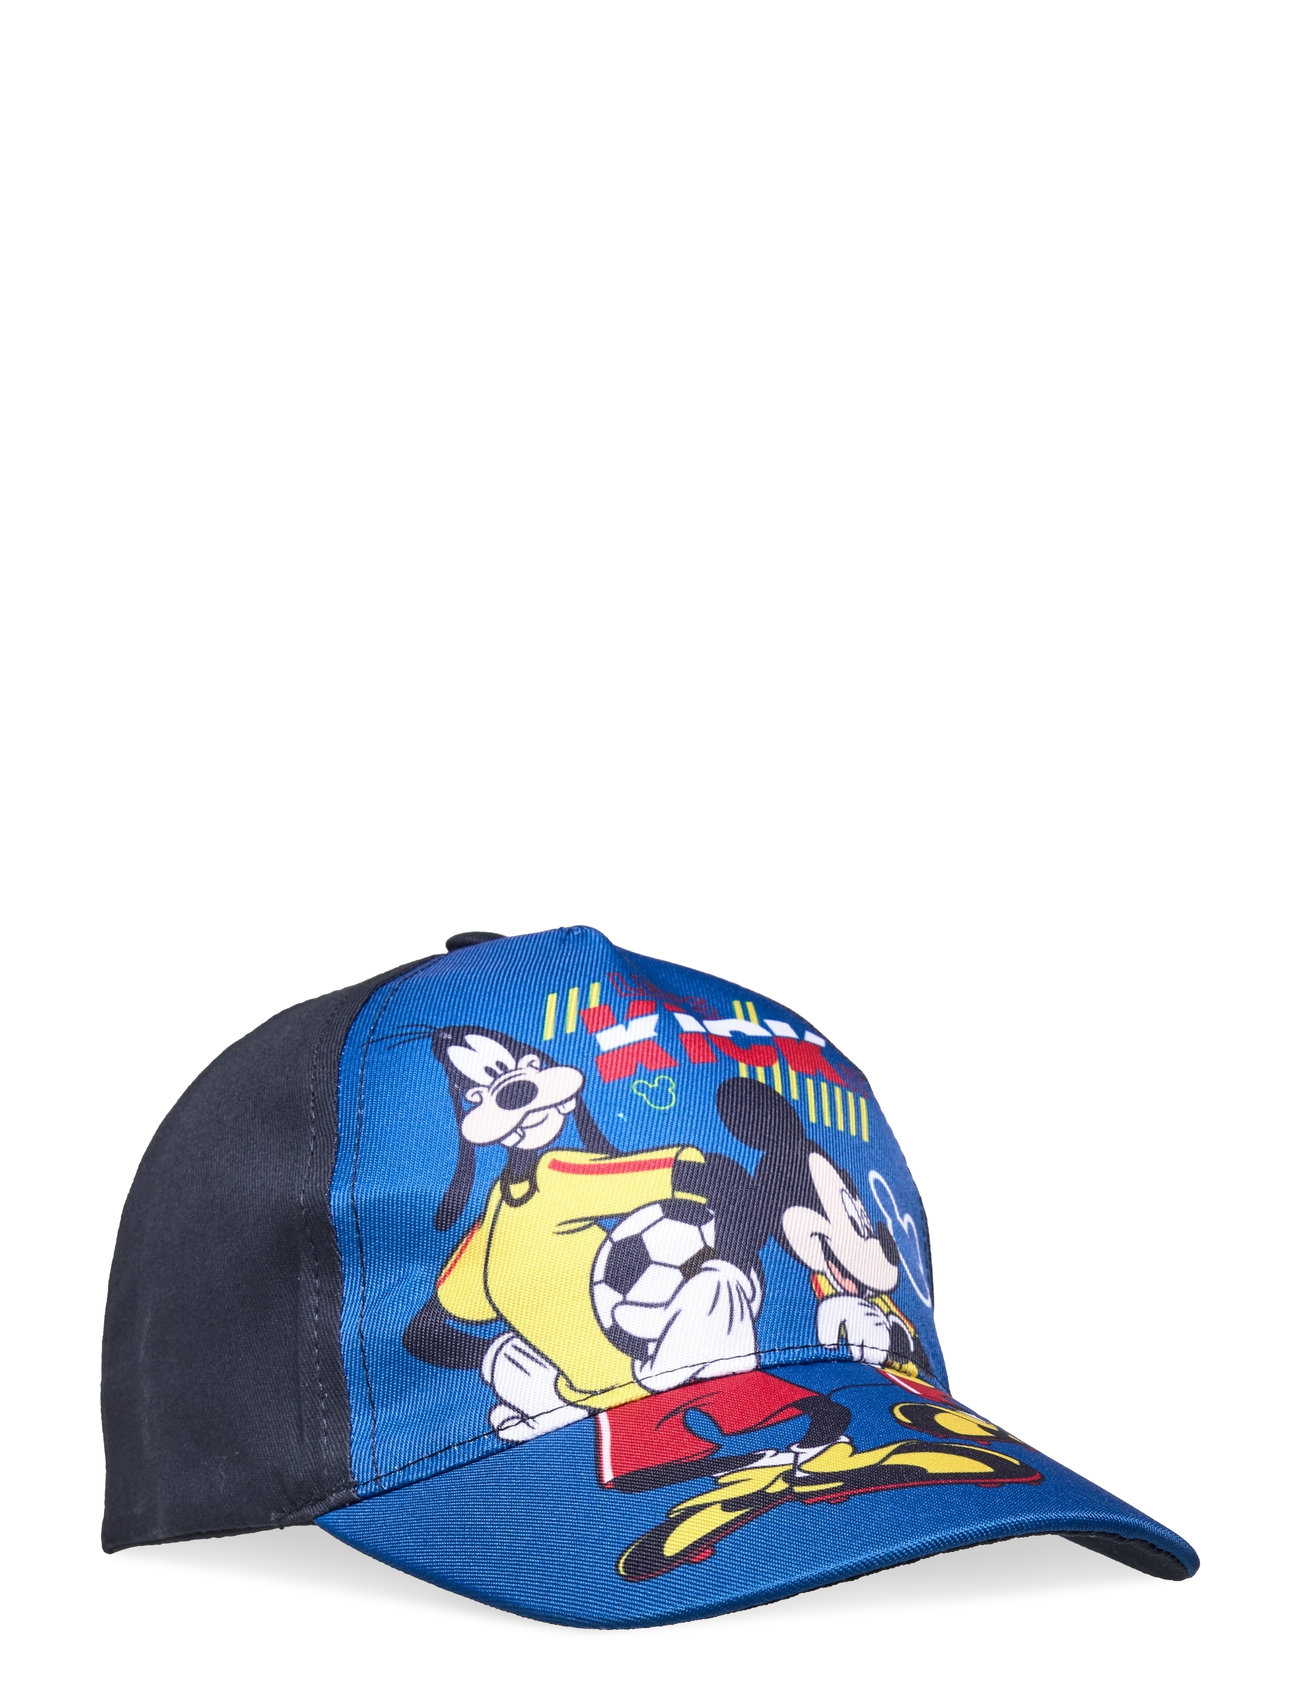 Cap In Sublimation Accessories Headwear Caps Navy Mickey Mouse